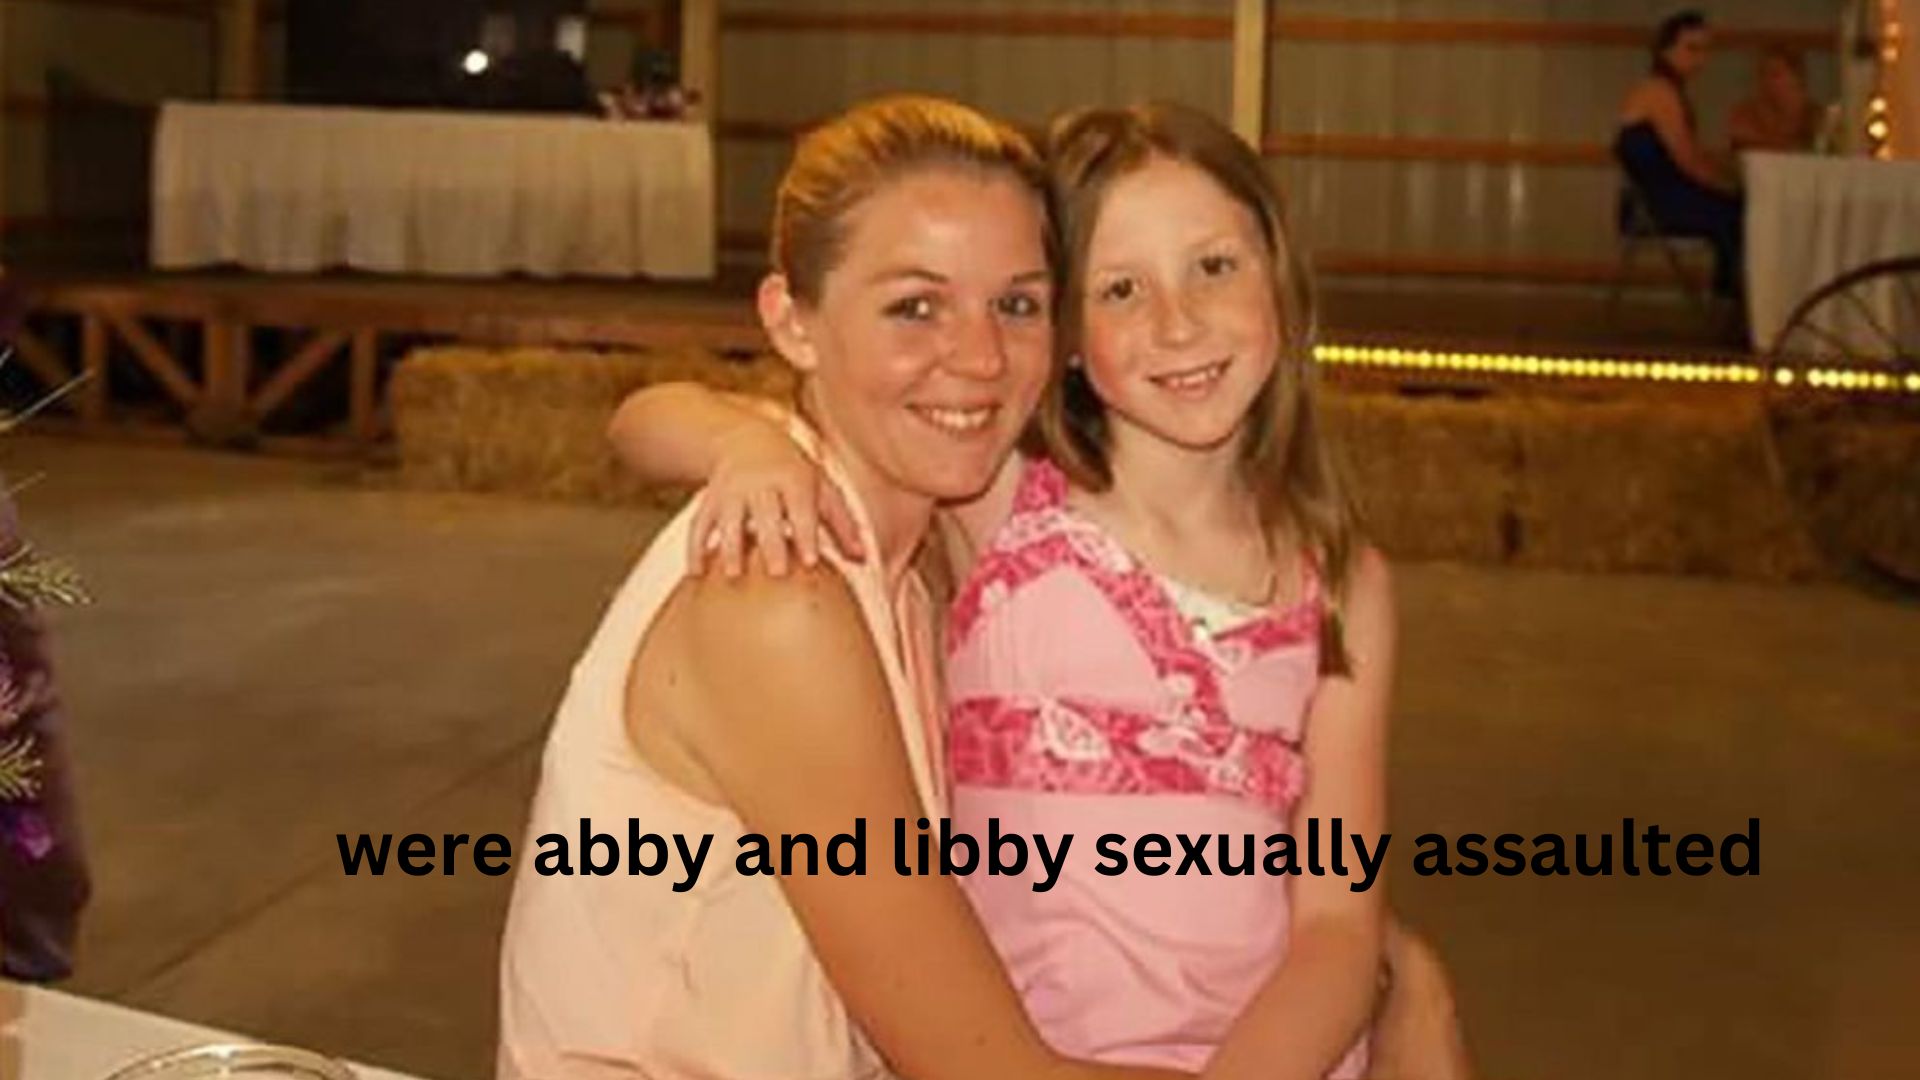 were abby and libby sexually assaulted